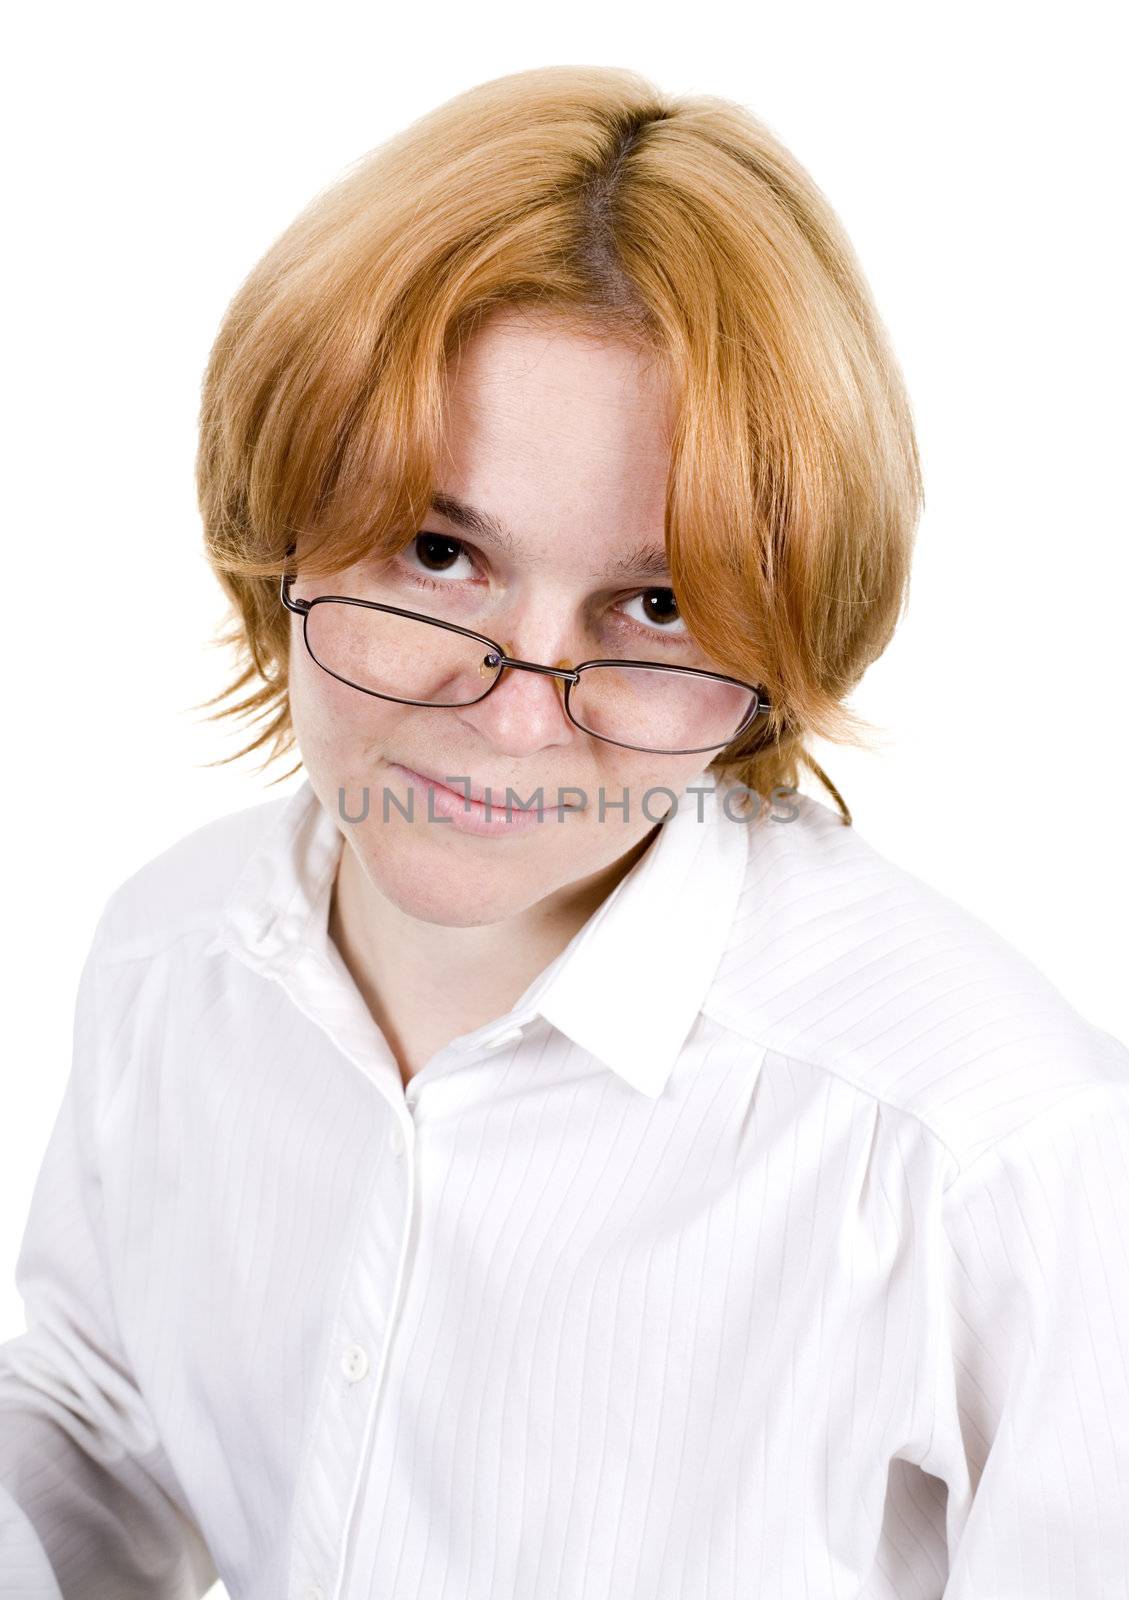 The girl in spectacles on white background